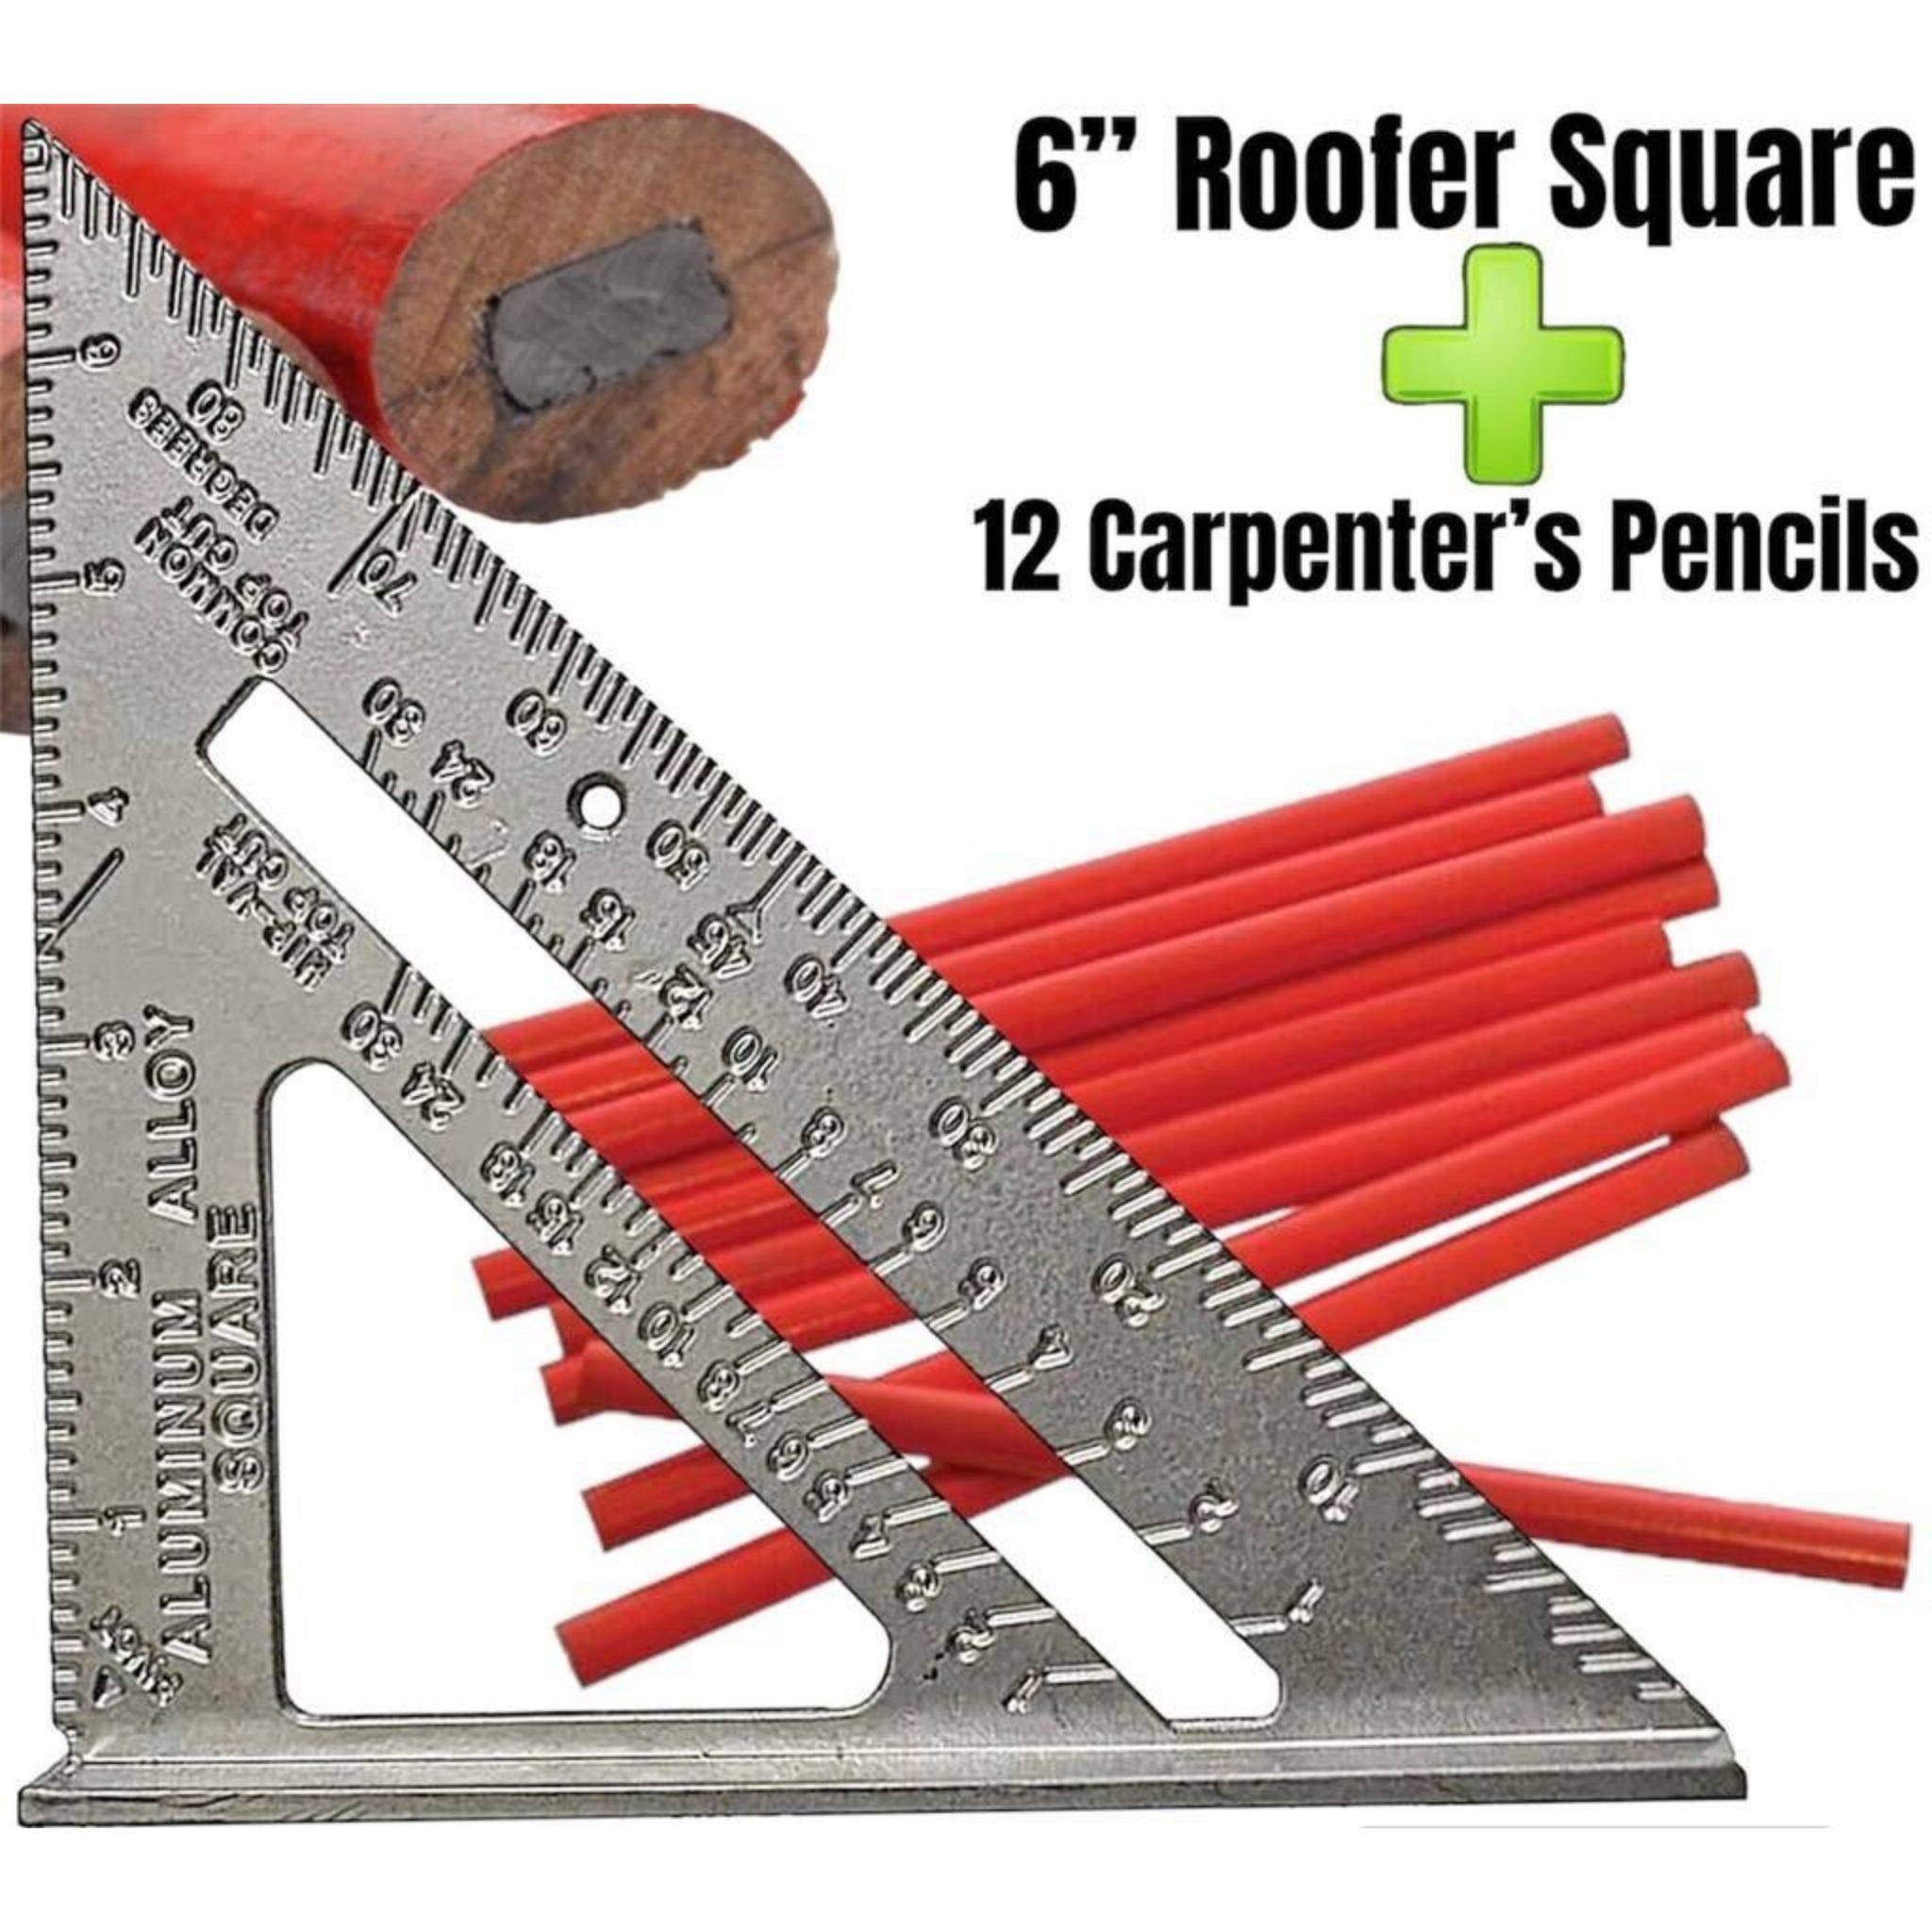 Beclen Harp 6'' New Aluminum Speed Square Roofing Rafter Triangle Angle Guide Carpenters Wood Working Alloy Tool+12 Carpenters Pencils